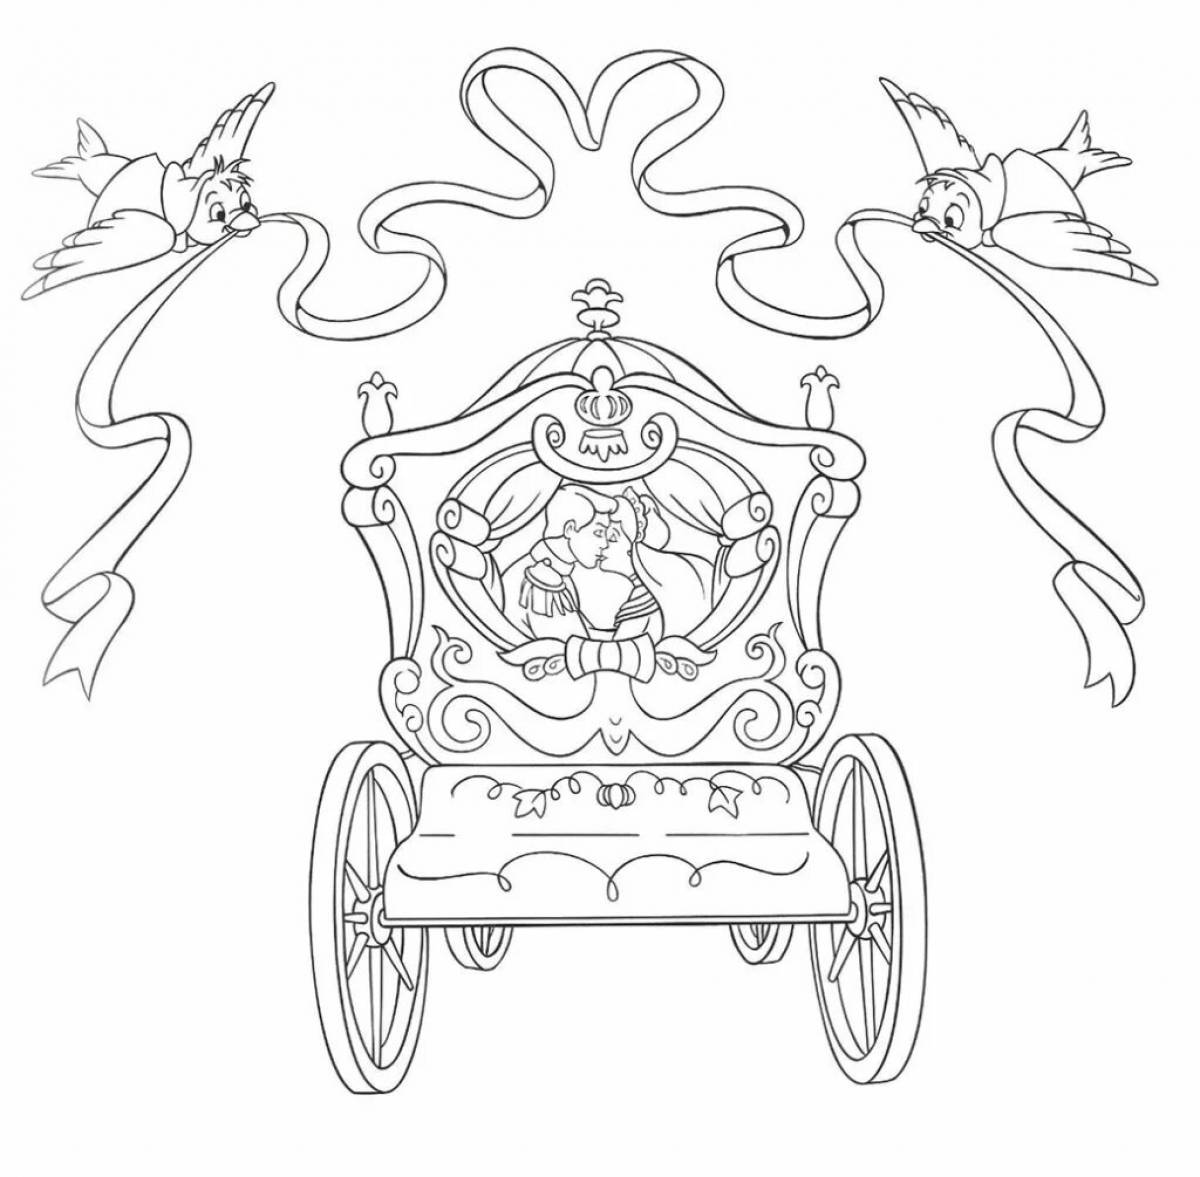 Coloring fairy princess in a carriage